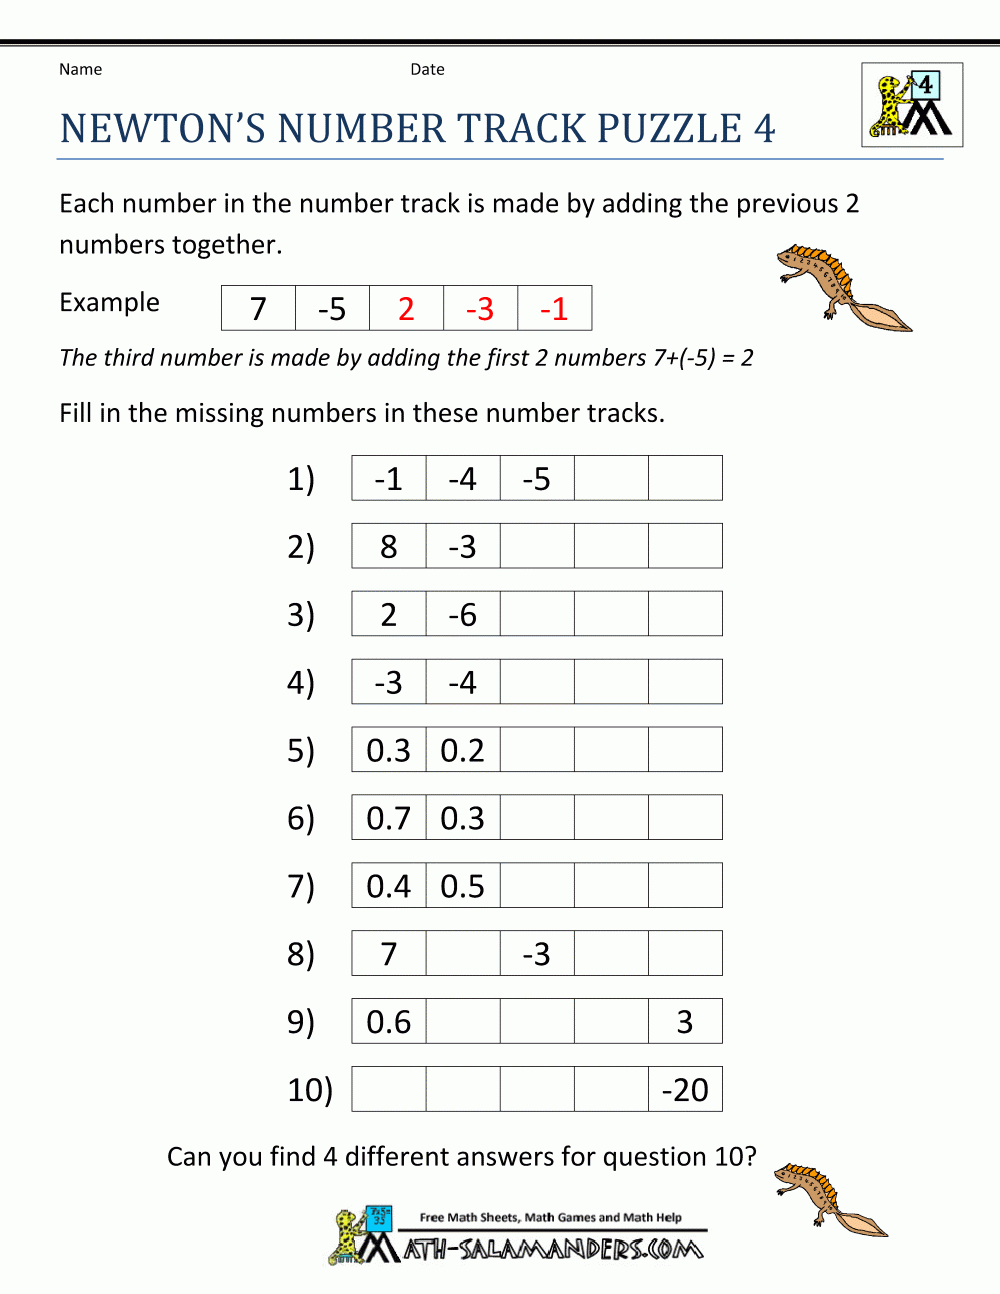 Free Math Puzzles 4Th Grade - Printable Puzzles For Grade 4